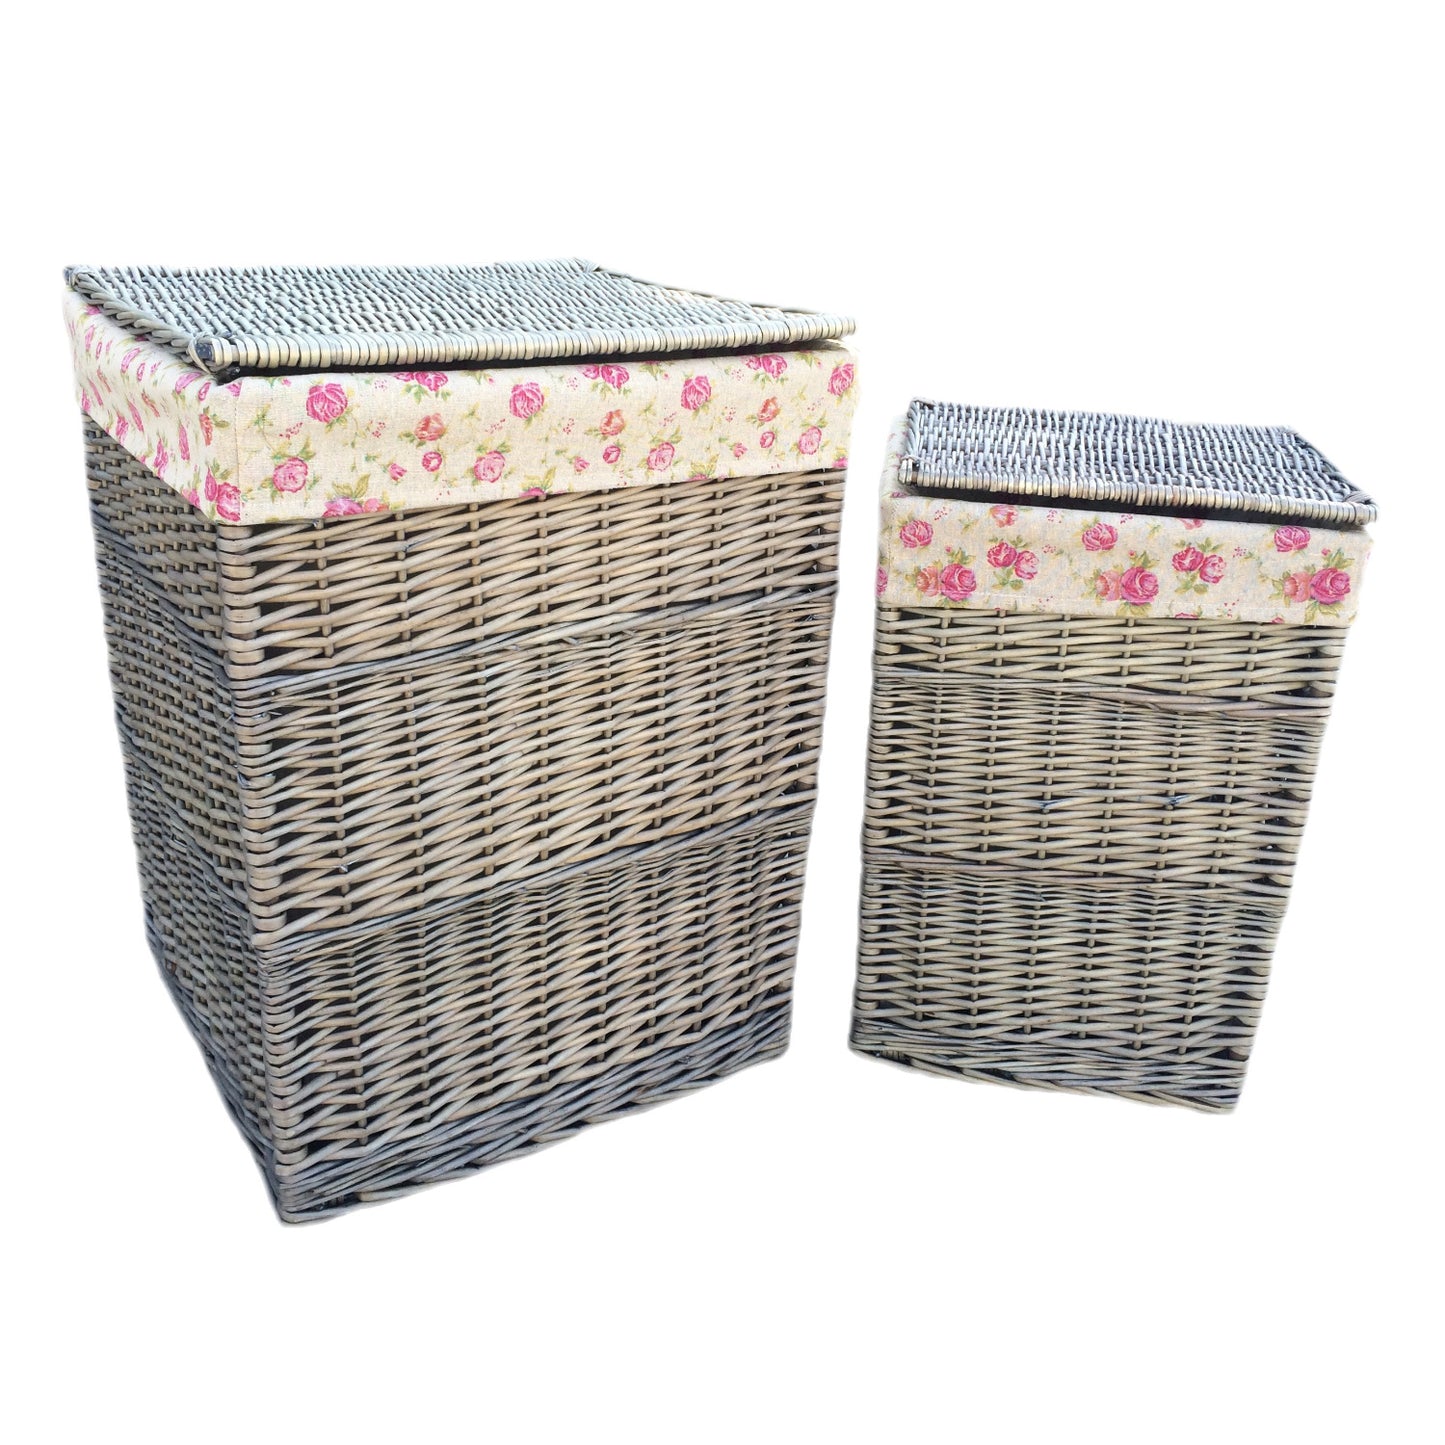 Large Square Laundry Basket With Garden Rose Lining